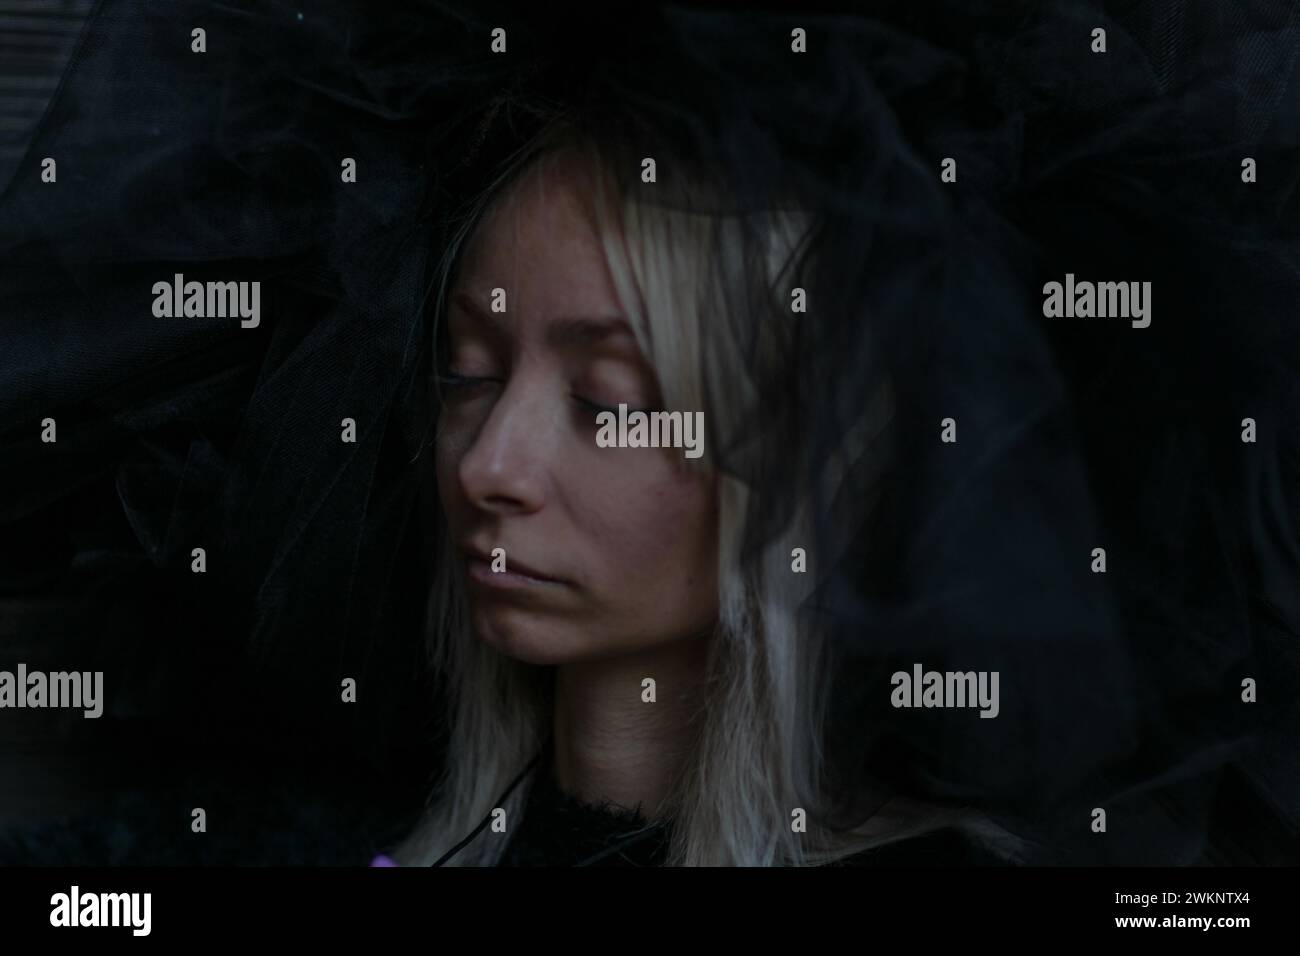 A young caucasian blonde woman's face is partially obscured by a dark veil, her eyes closed in a serene expression Stock Photo